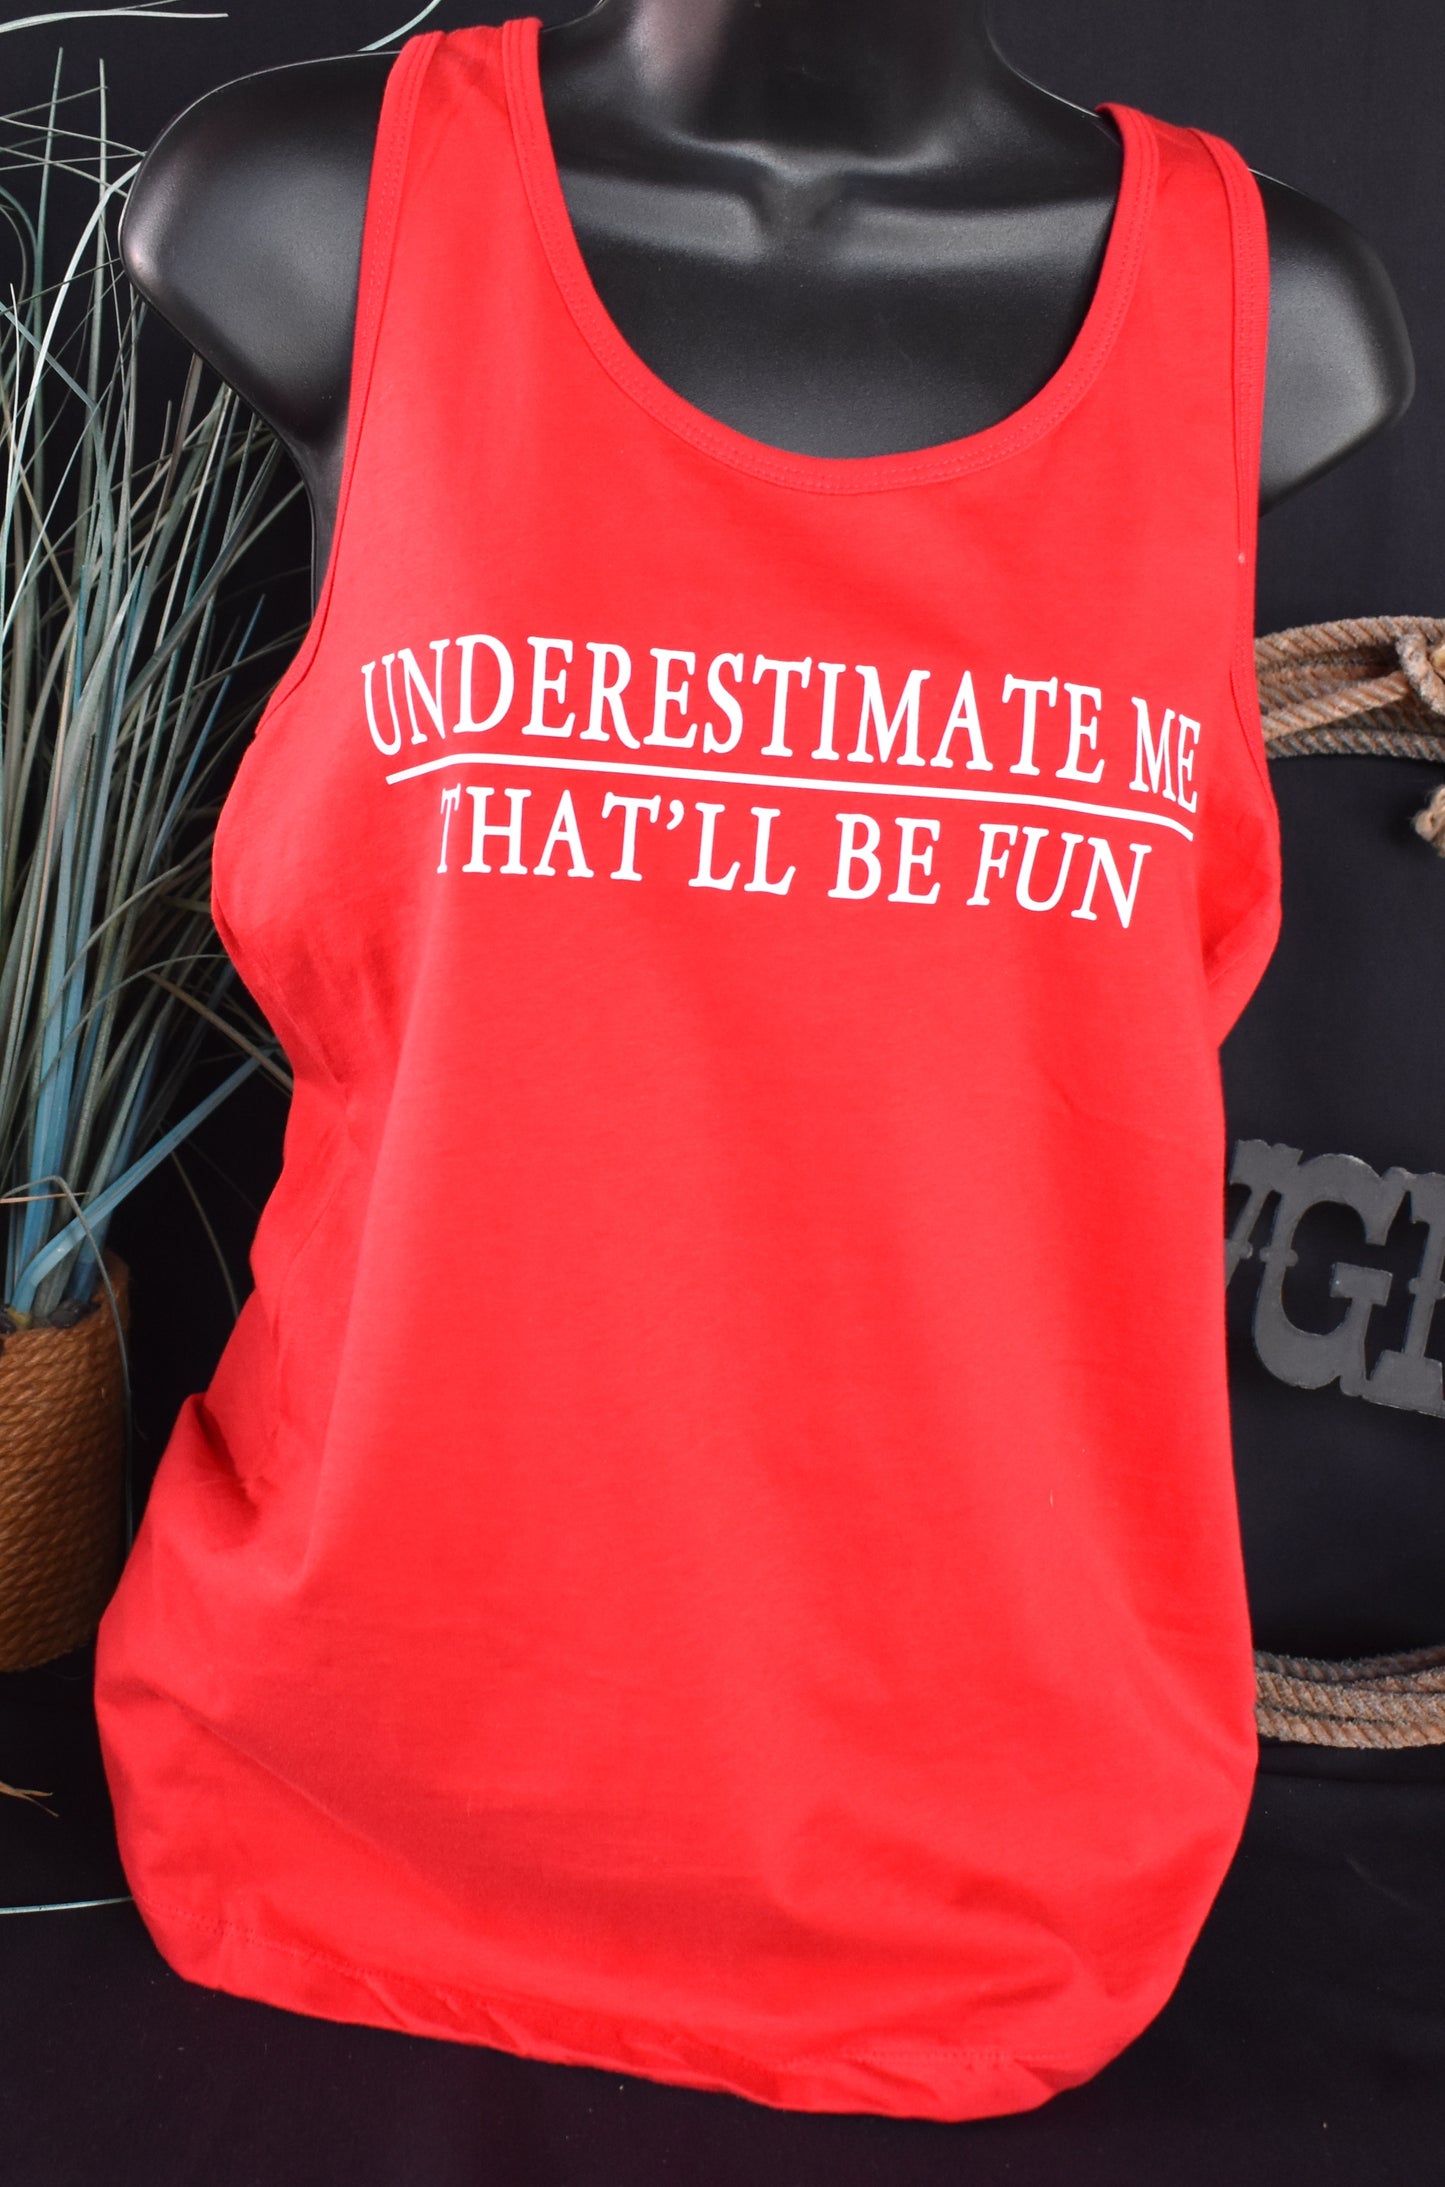 Underestimate Me That will be fun!! - Women's